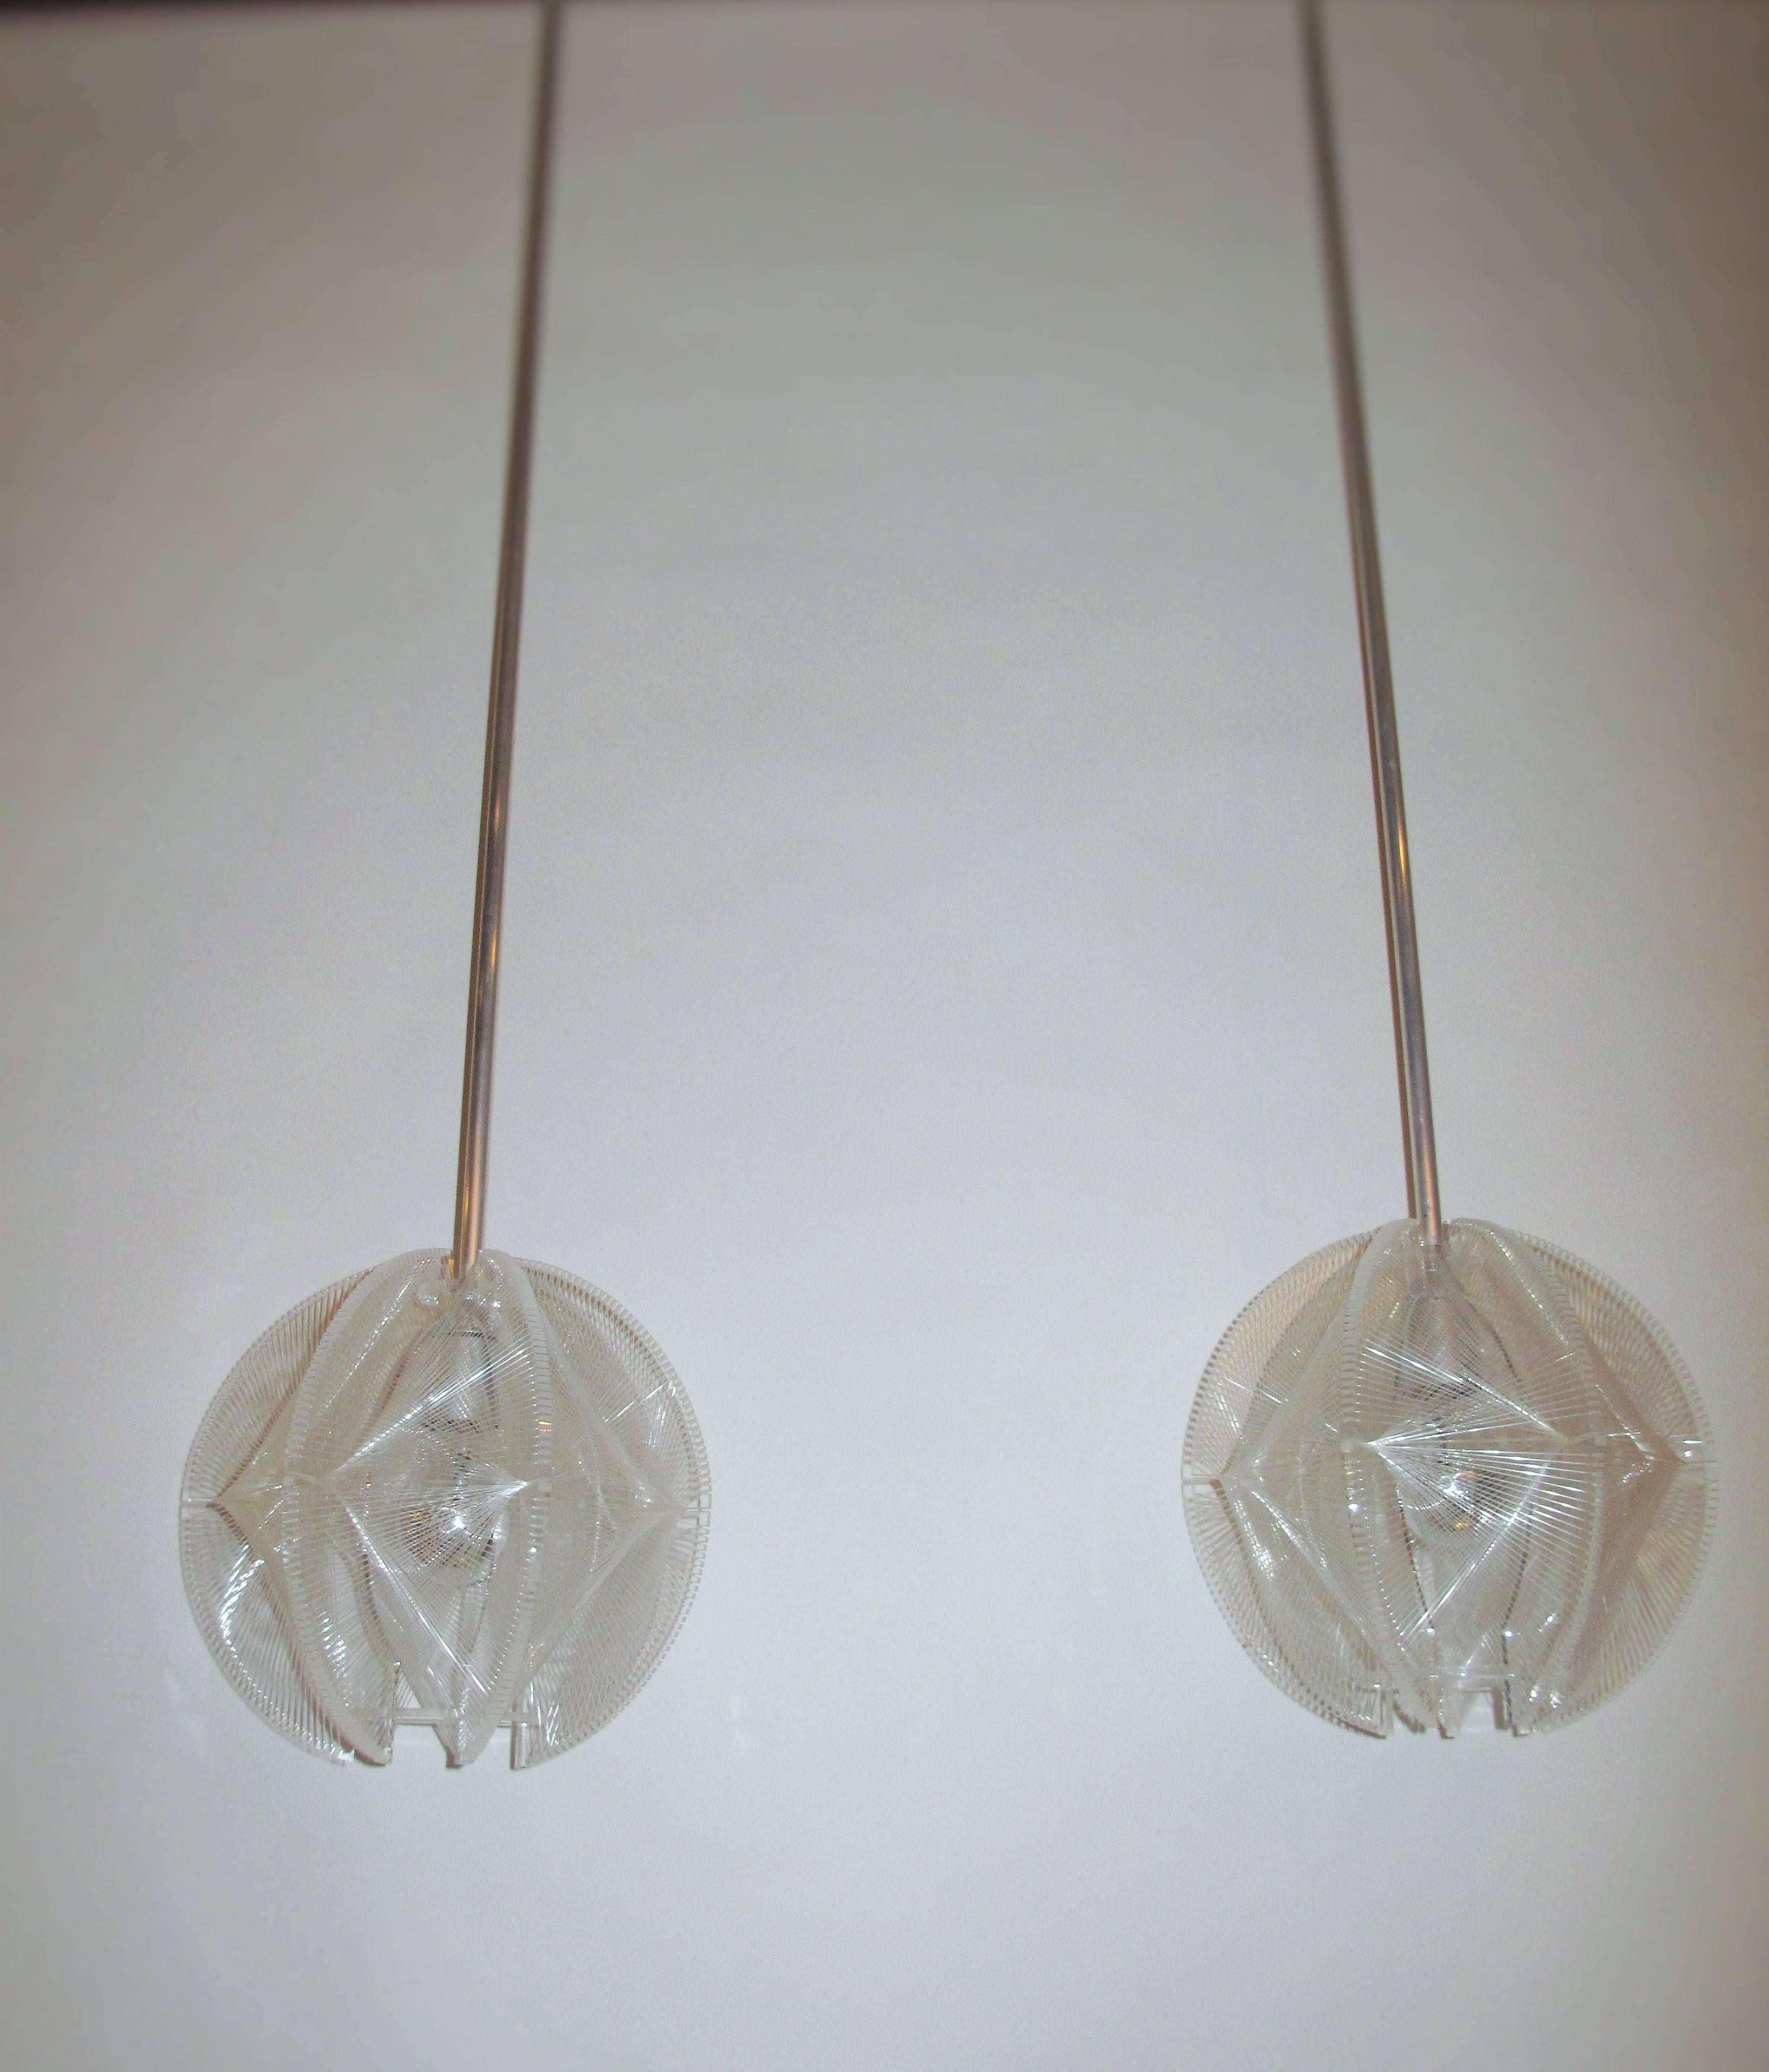 Paul Secon, Set of Four Ceiling Lamps for Sompex  1